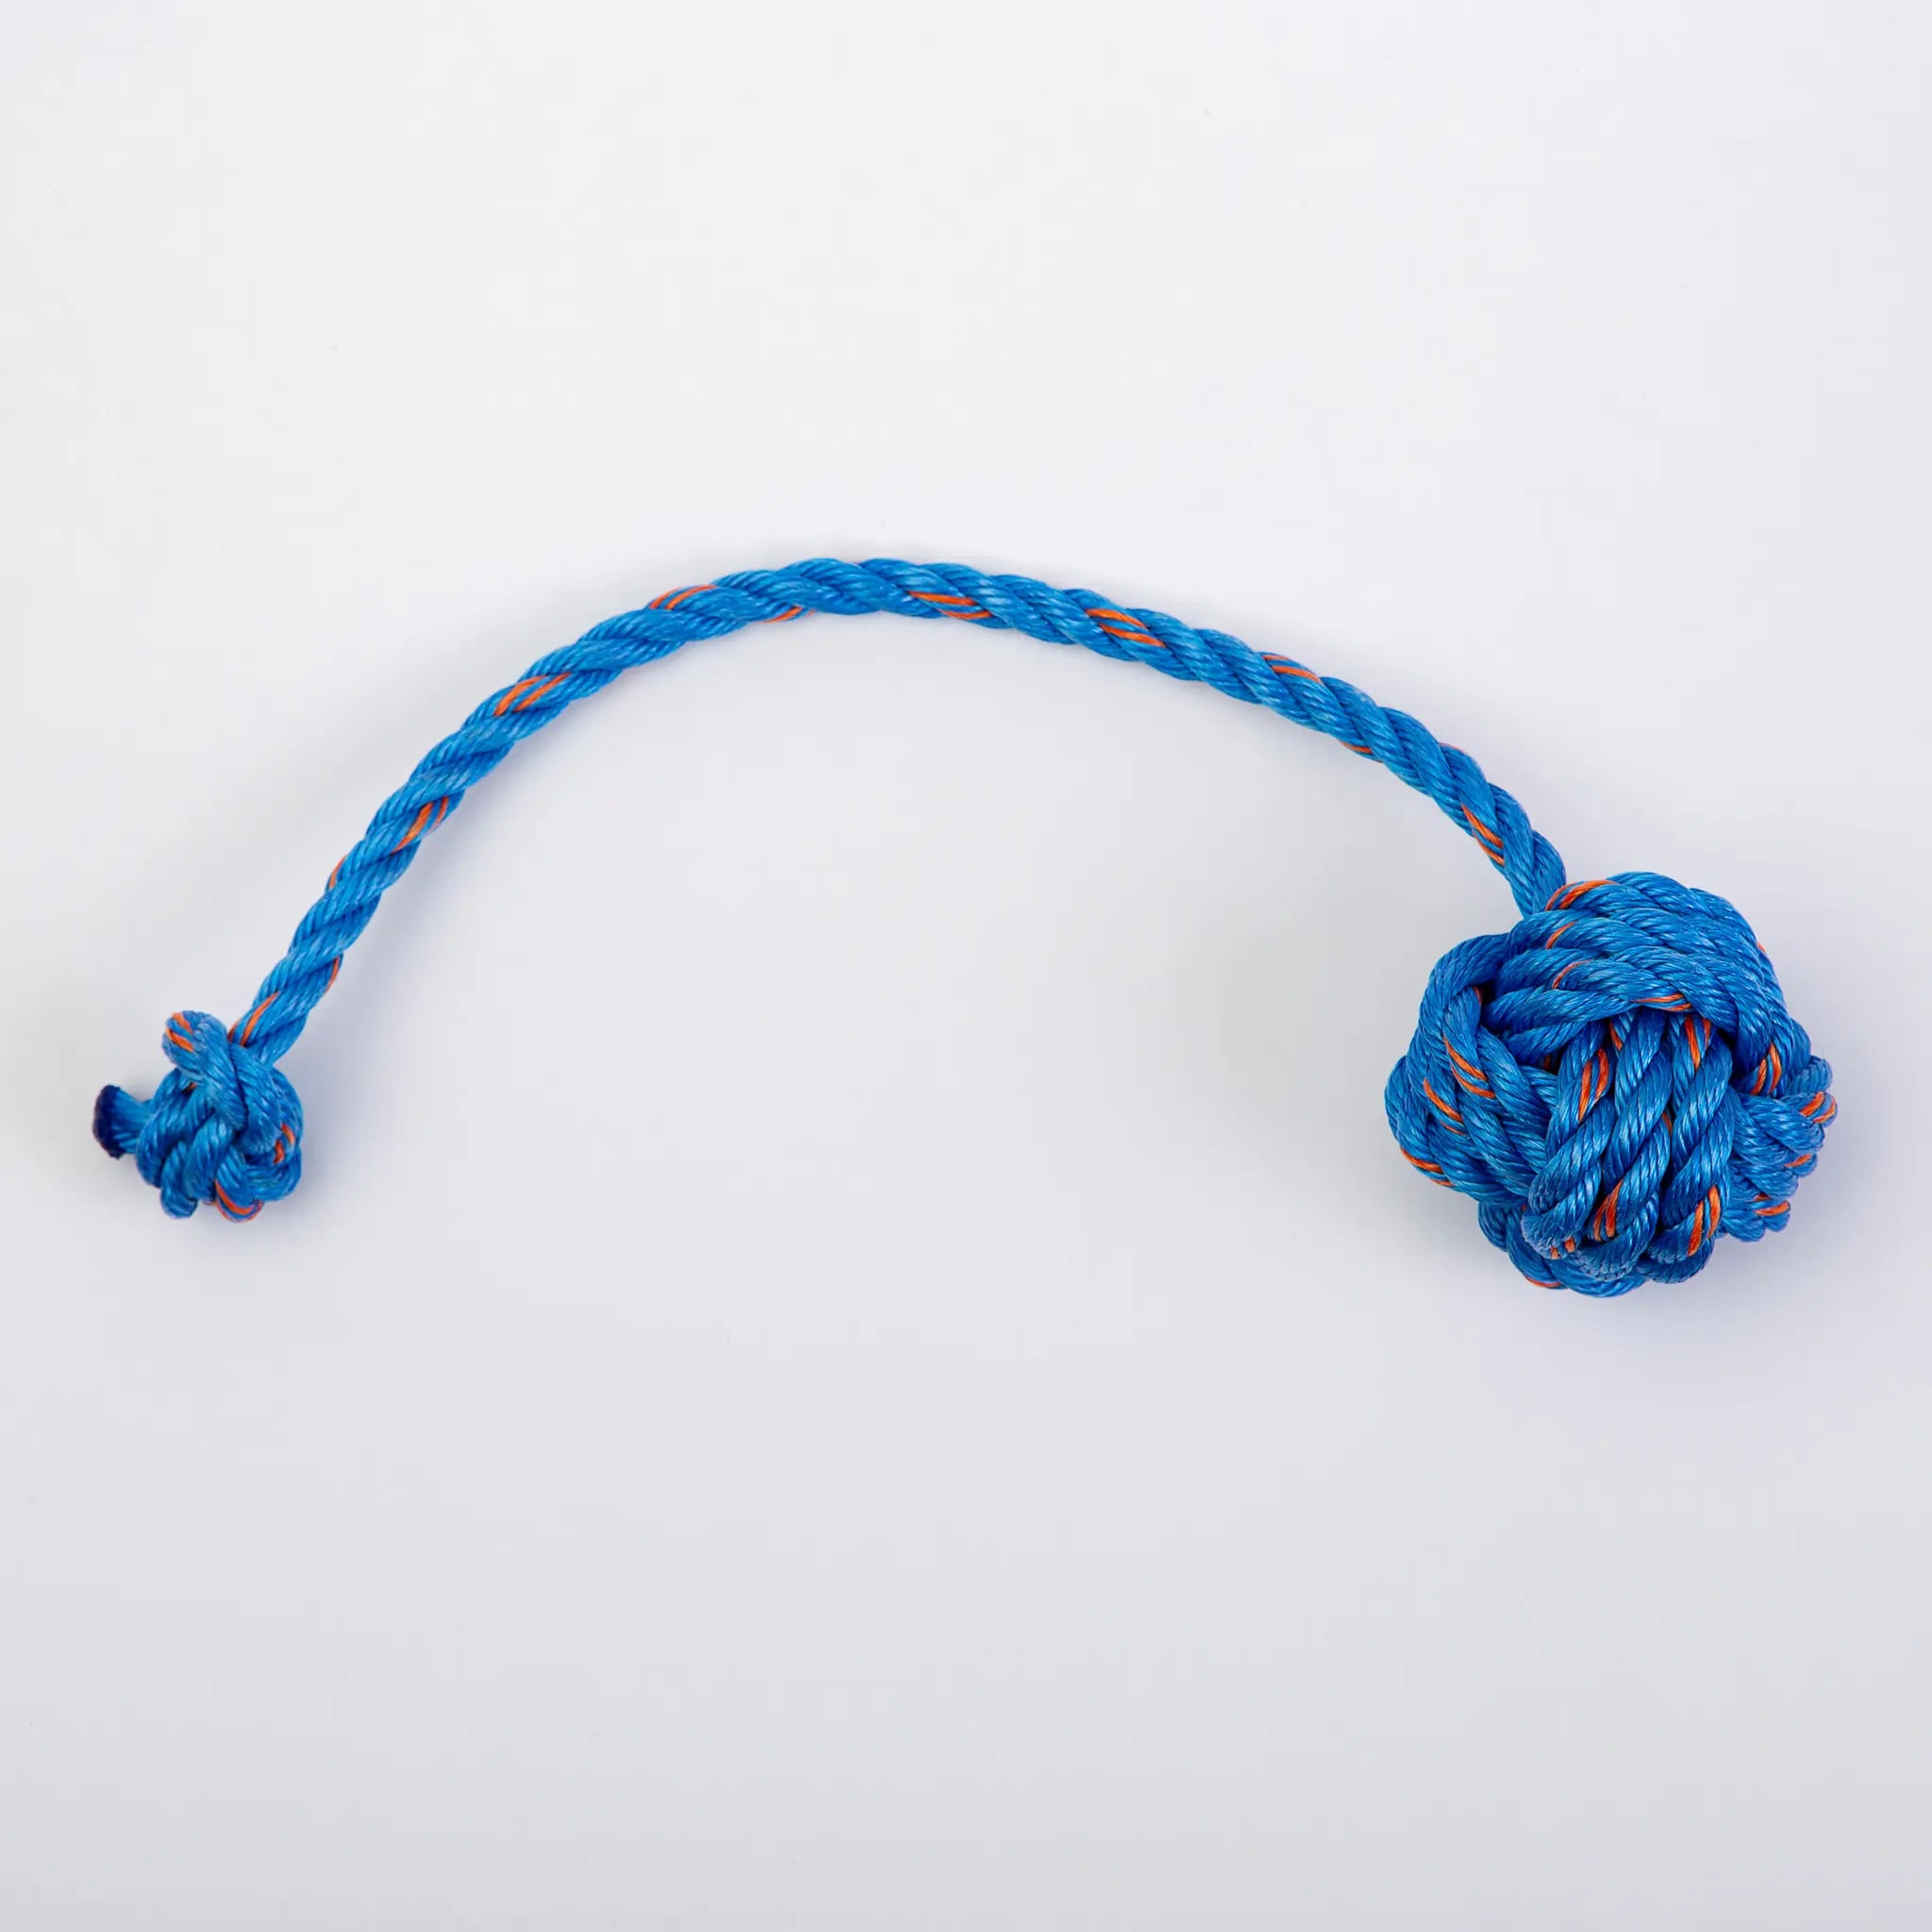 Floating Rope Fetch Toy, Maine Made Dog Toy, Down East Shop